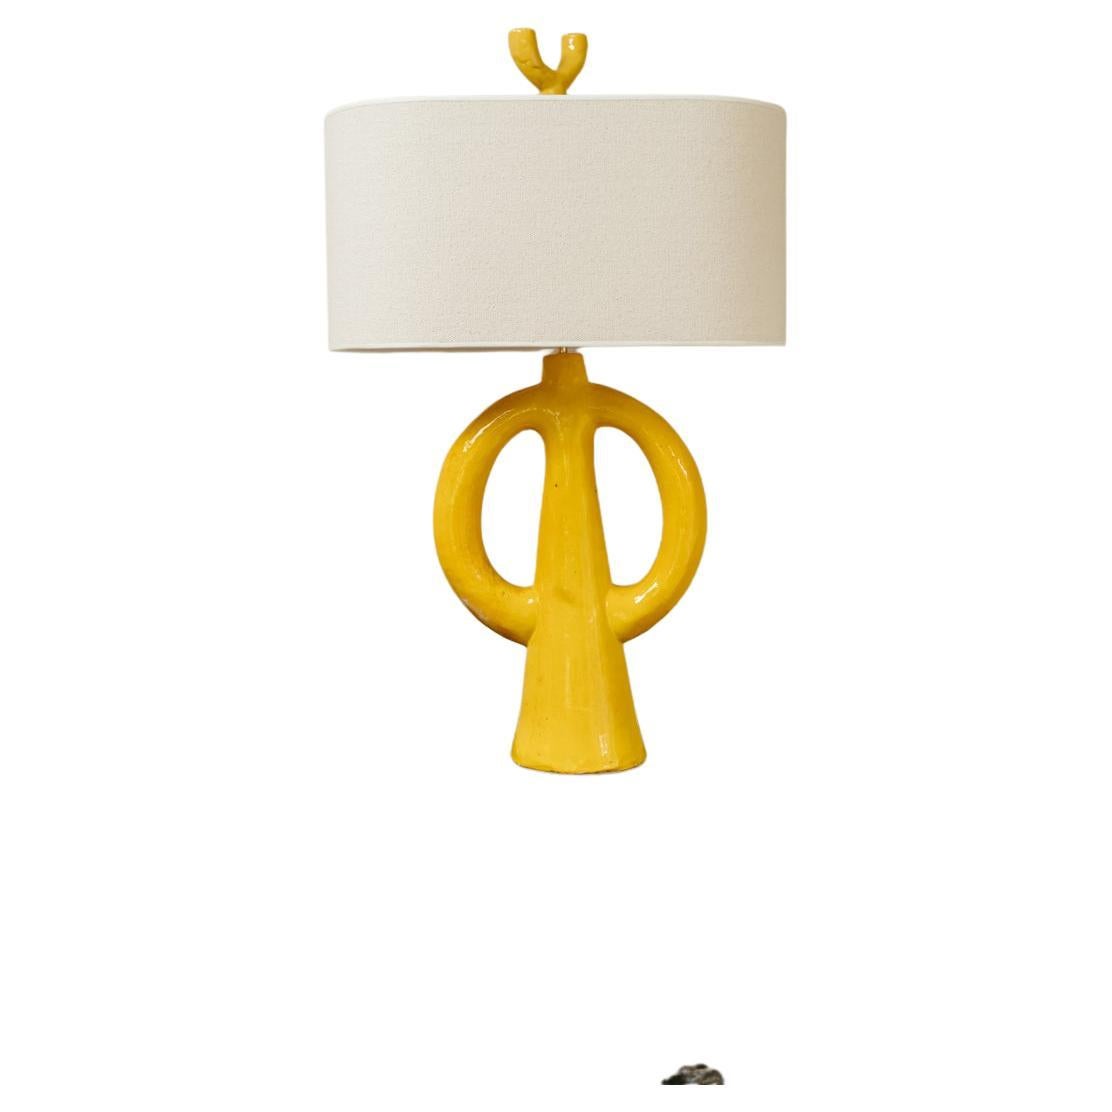 Jacques Darbaud "Madam" Yellow Glazed Ceramic Table Lamp For Sale